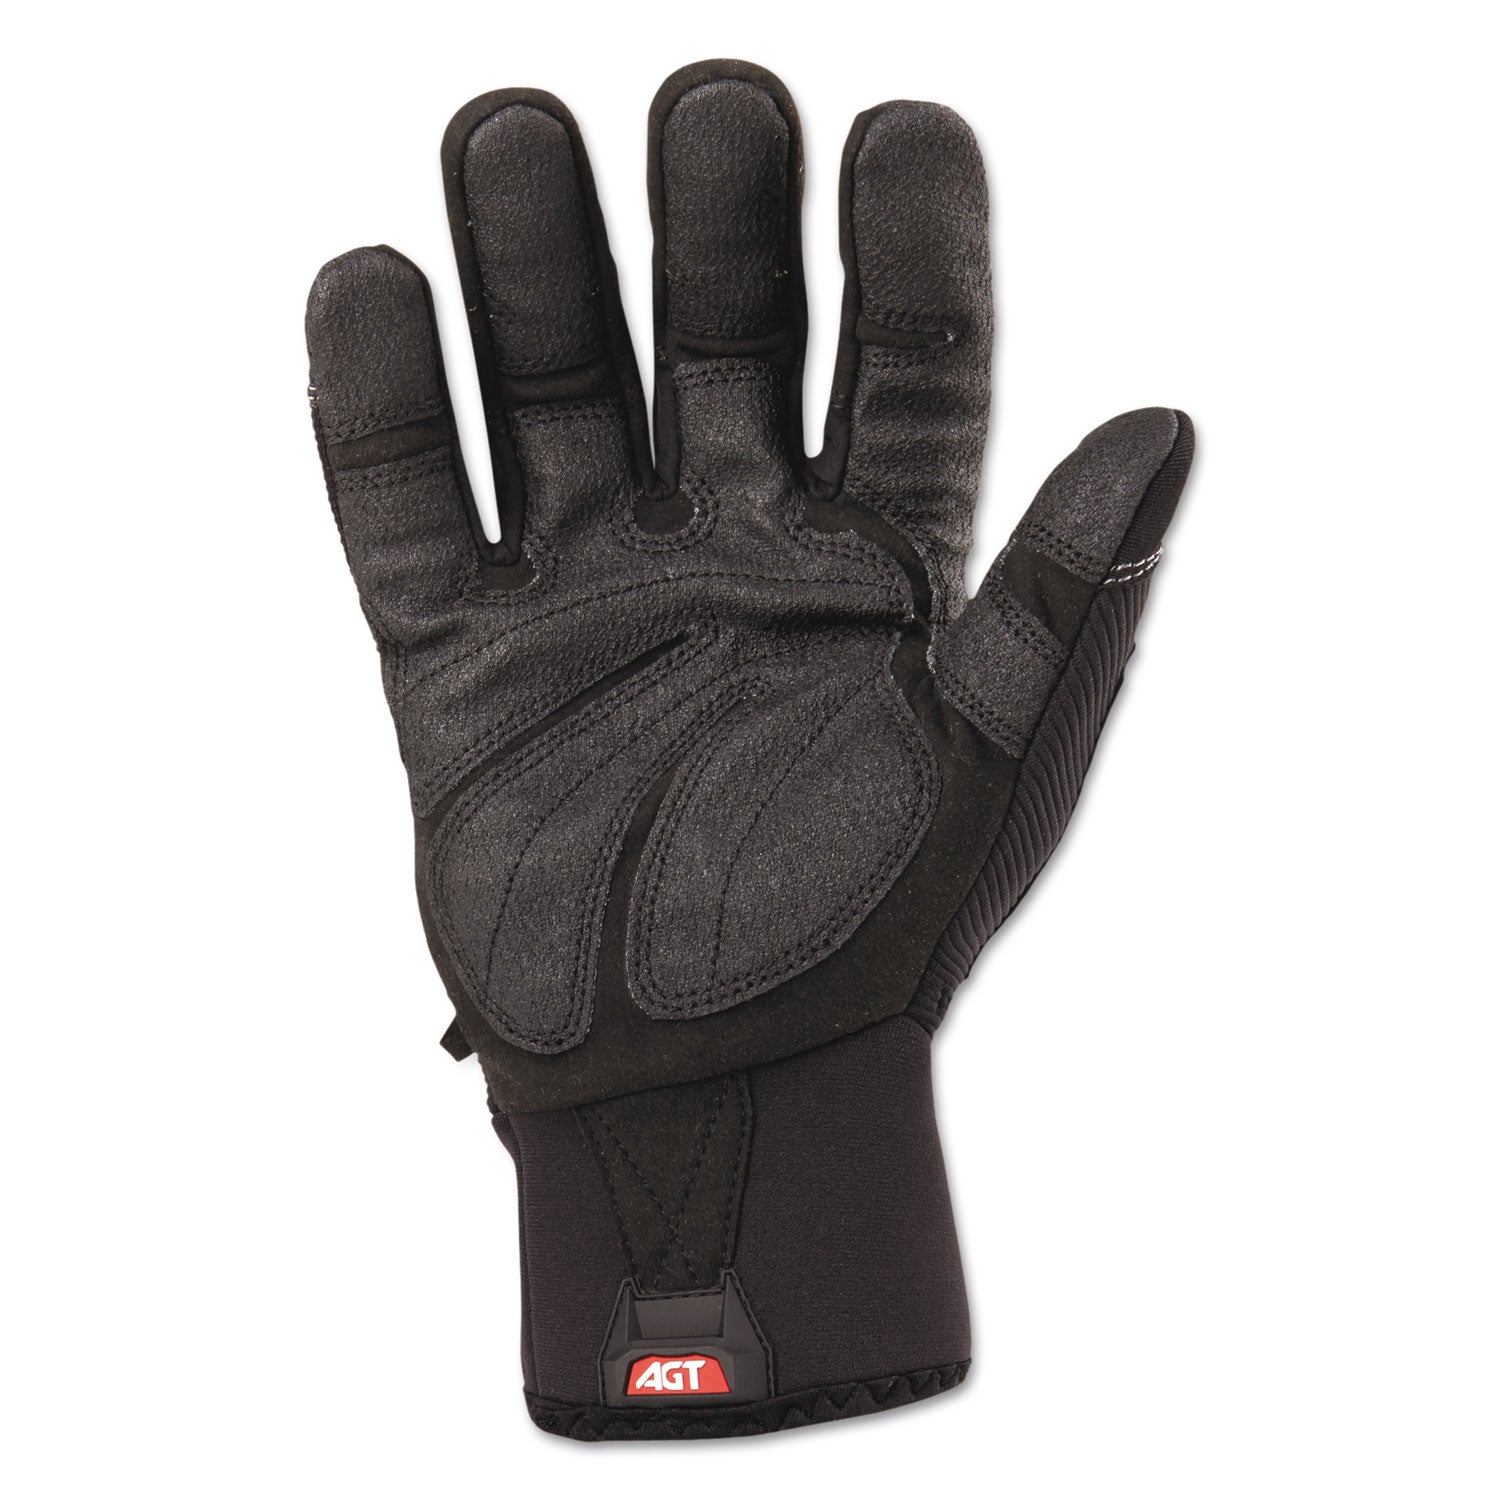 Cold Condition Gloves, Black, X-Large - 